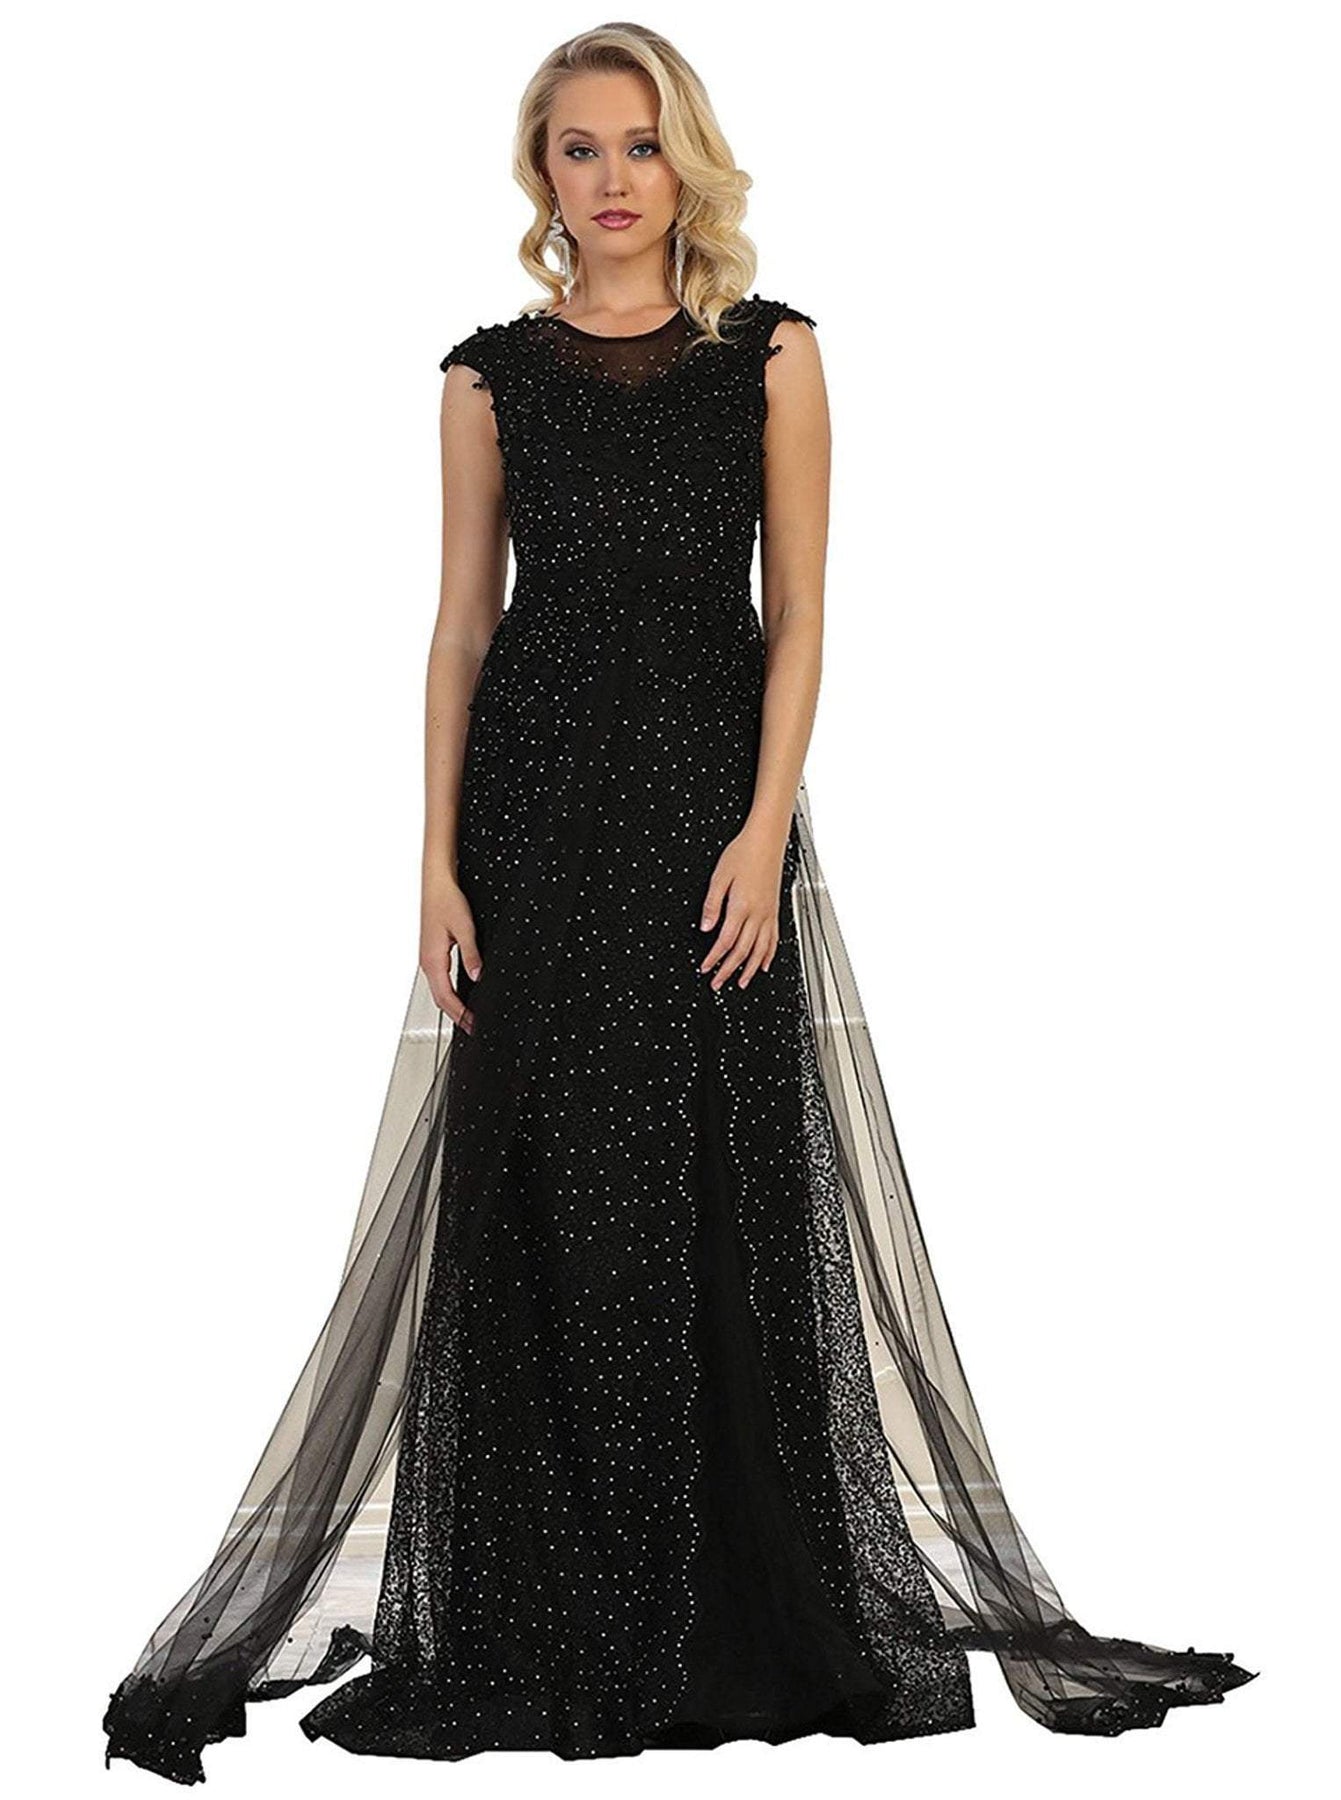 May Queen - RQ7556 Embellished Illusion Jewel Fitted Evening Gown Special Occasion Dress 4 / Black